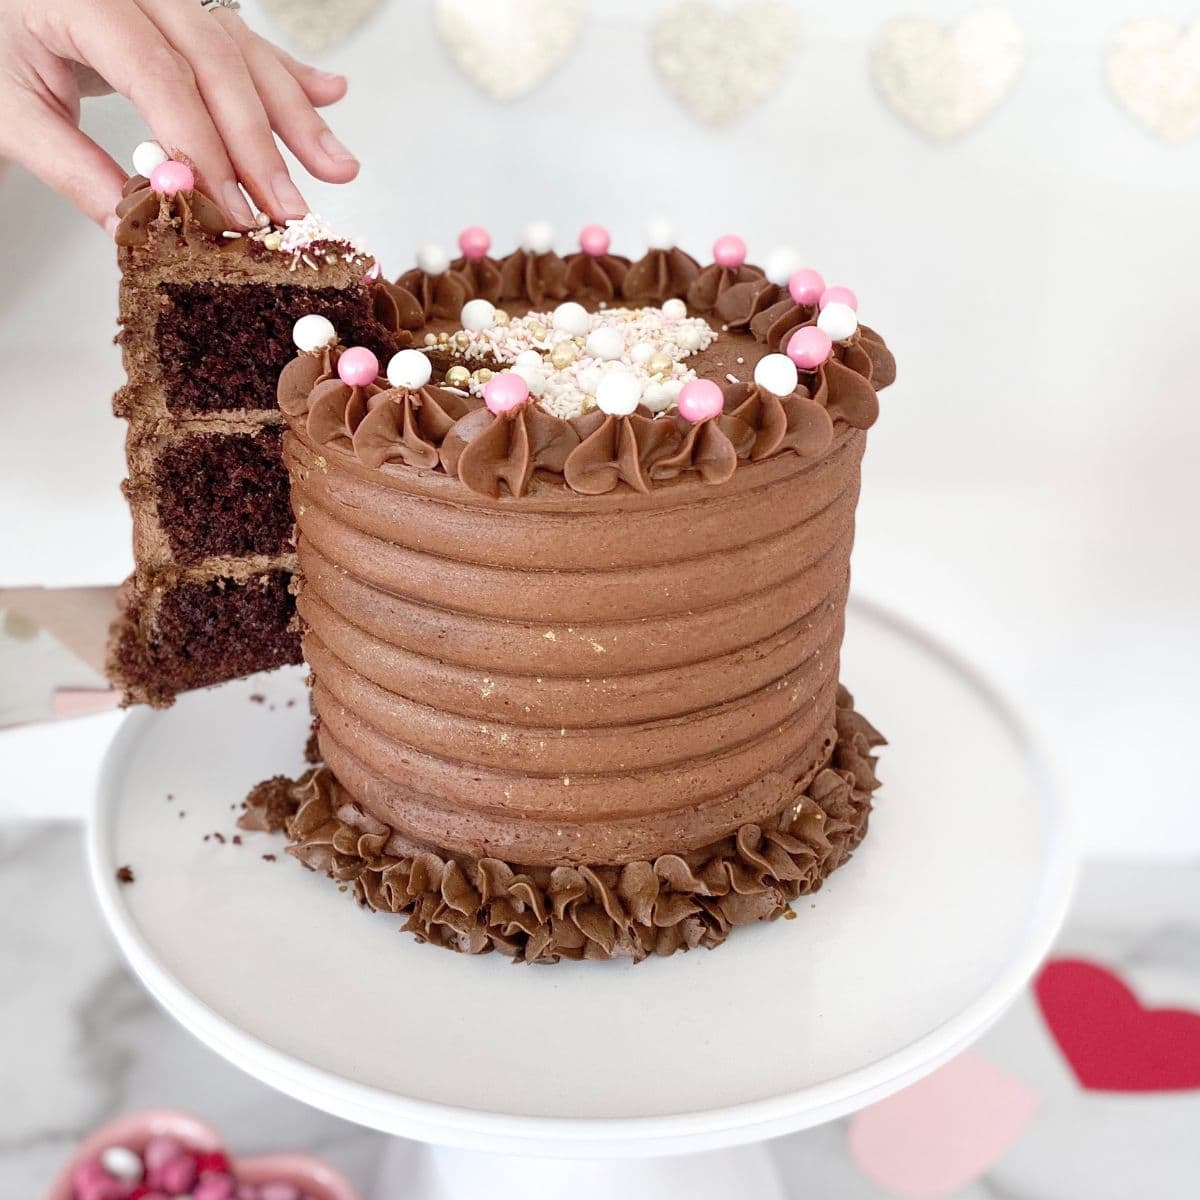 a chocolate cake being sliced